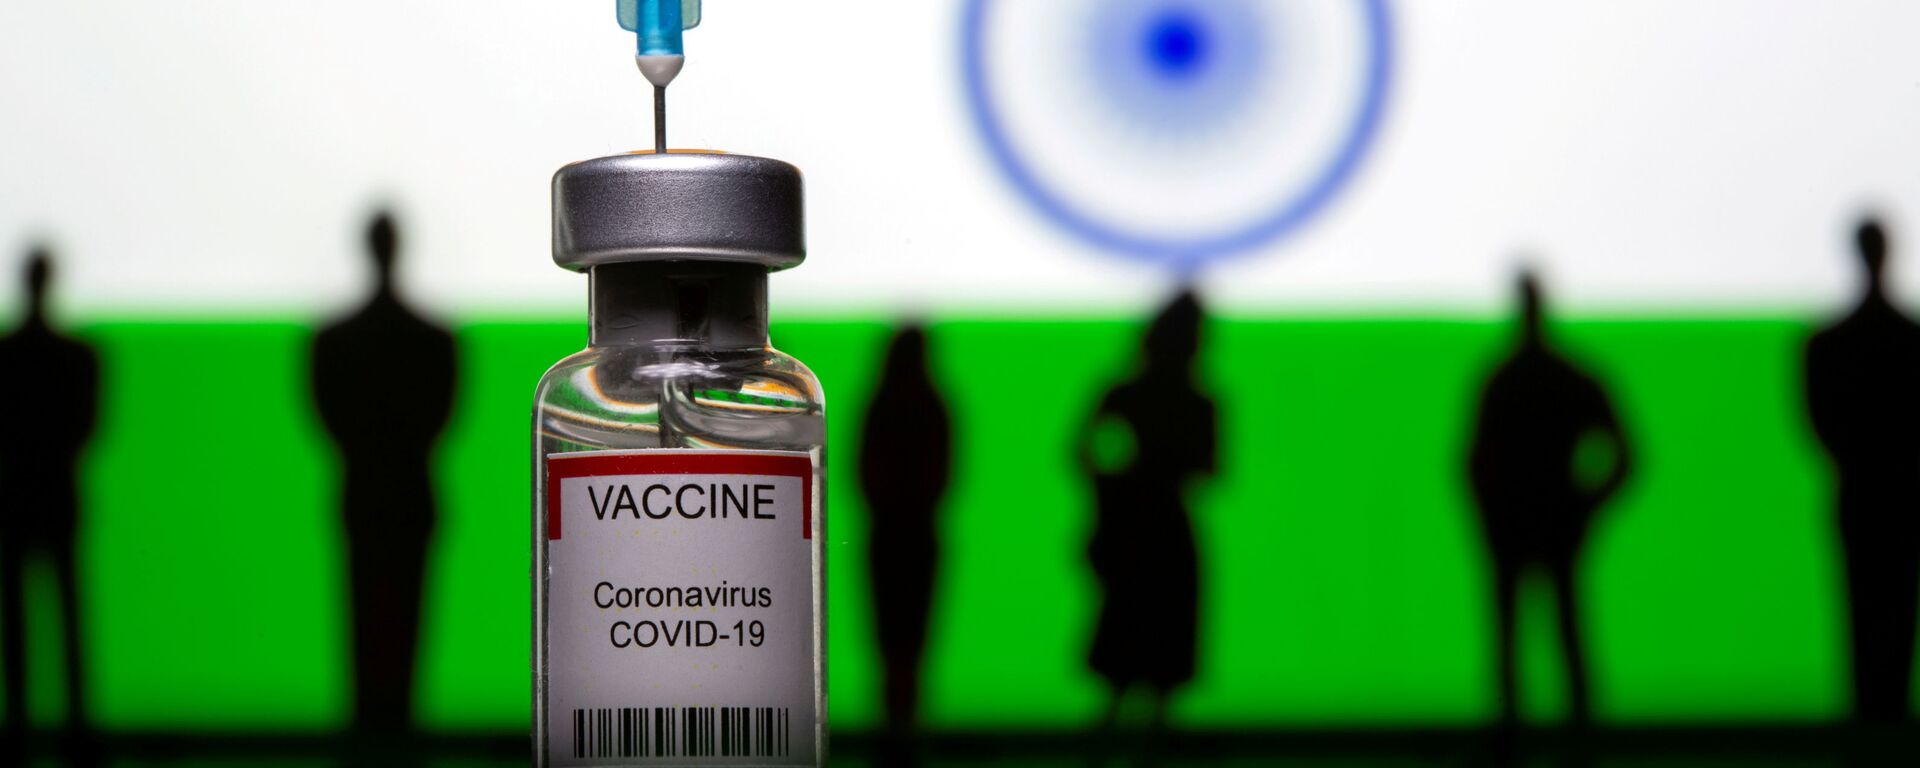 3D-printed small toy figurines, a syringe and vial labelled coronavirus disease (COVID-19) vaccine are seen in front of India flag - Sputnik International, 1920, 21.10.2021